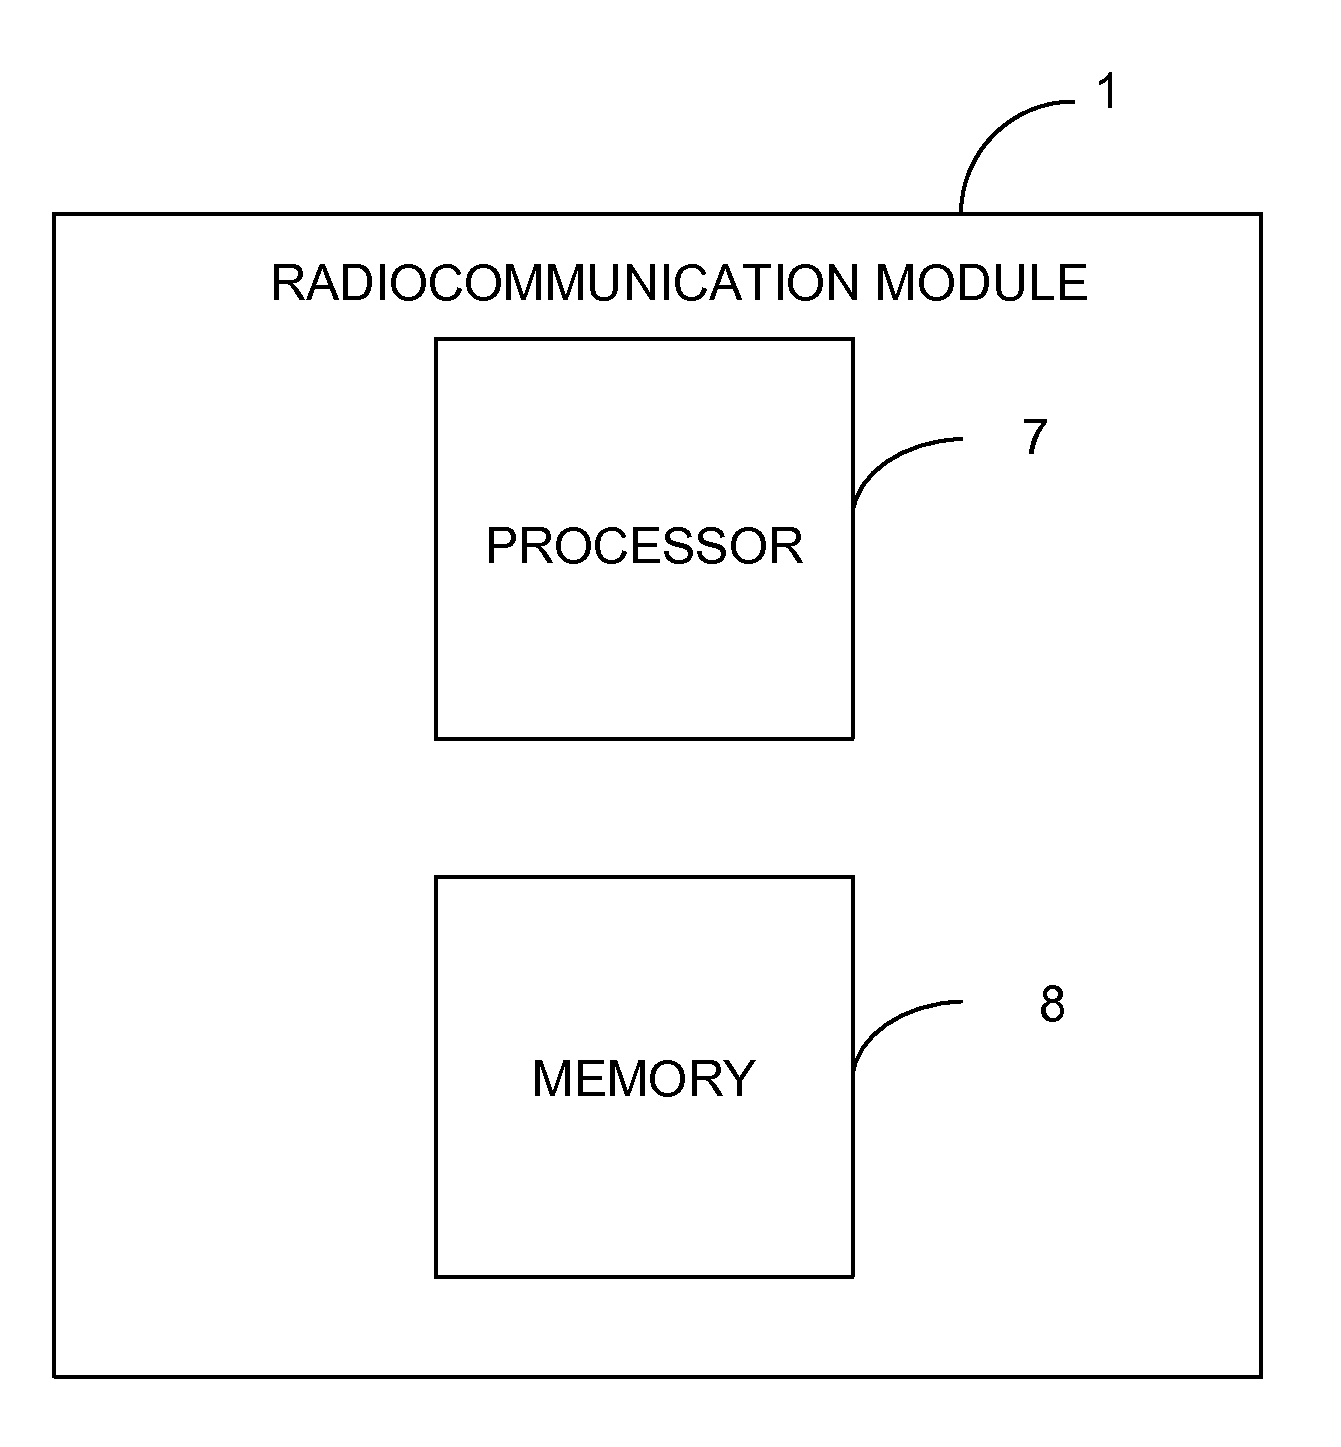 Radiocommunication module executing a main software and a client software comprising several client applications